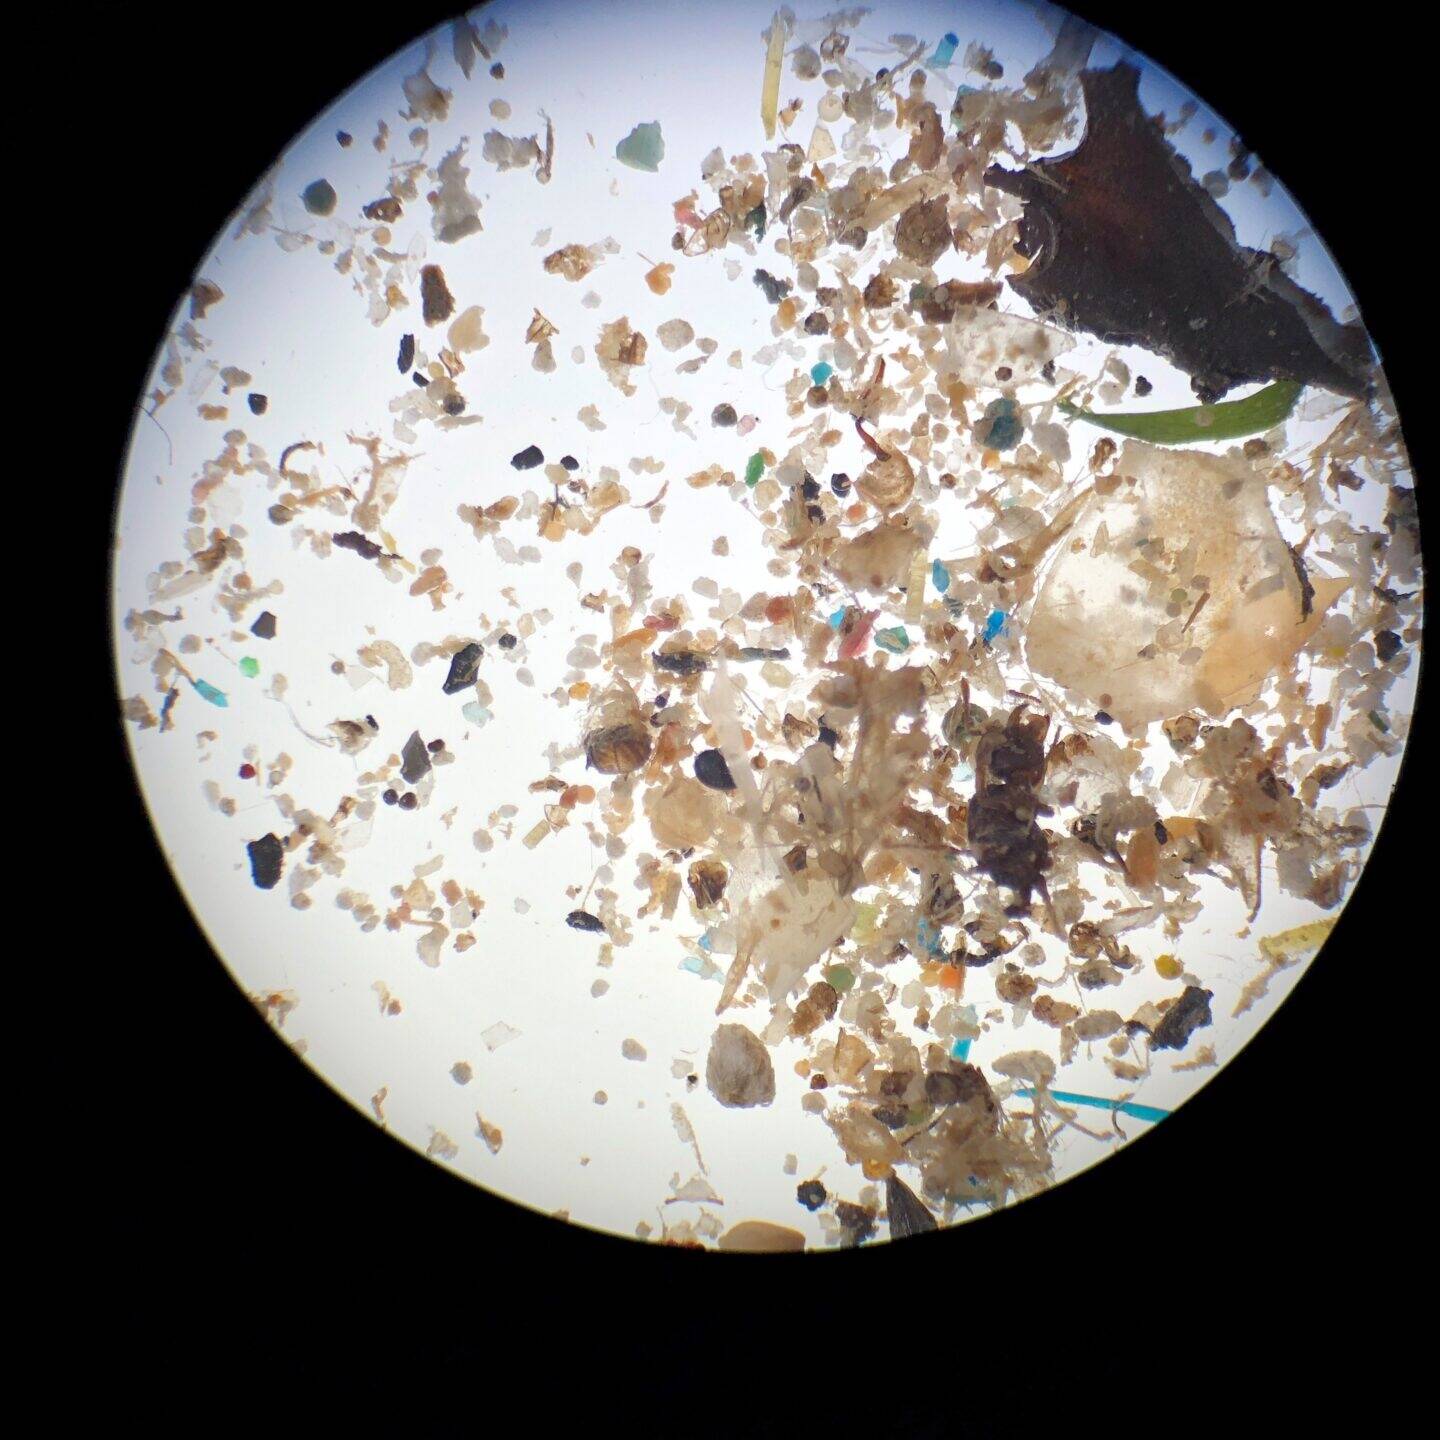 Micro-photograph of microplastics collected from Hudson River water.
Photo credit Hudson River Park